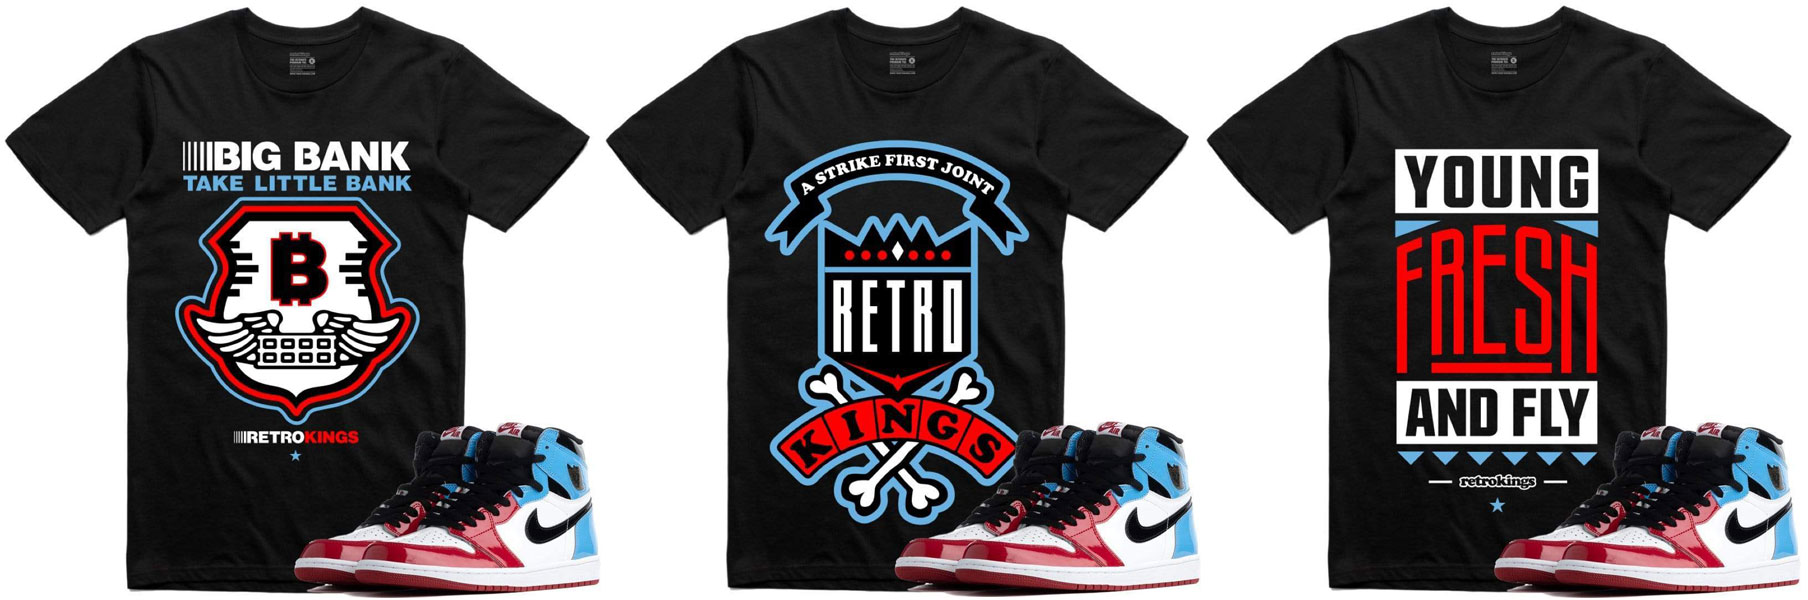 retro 1 fearless clothing